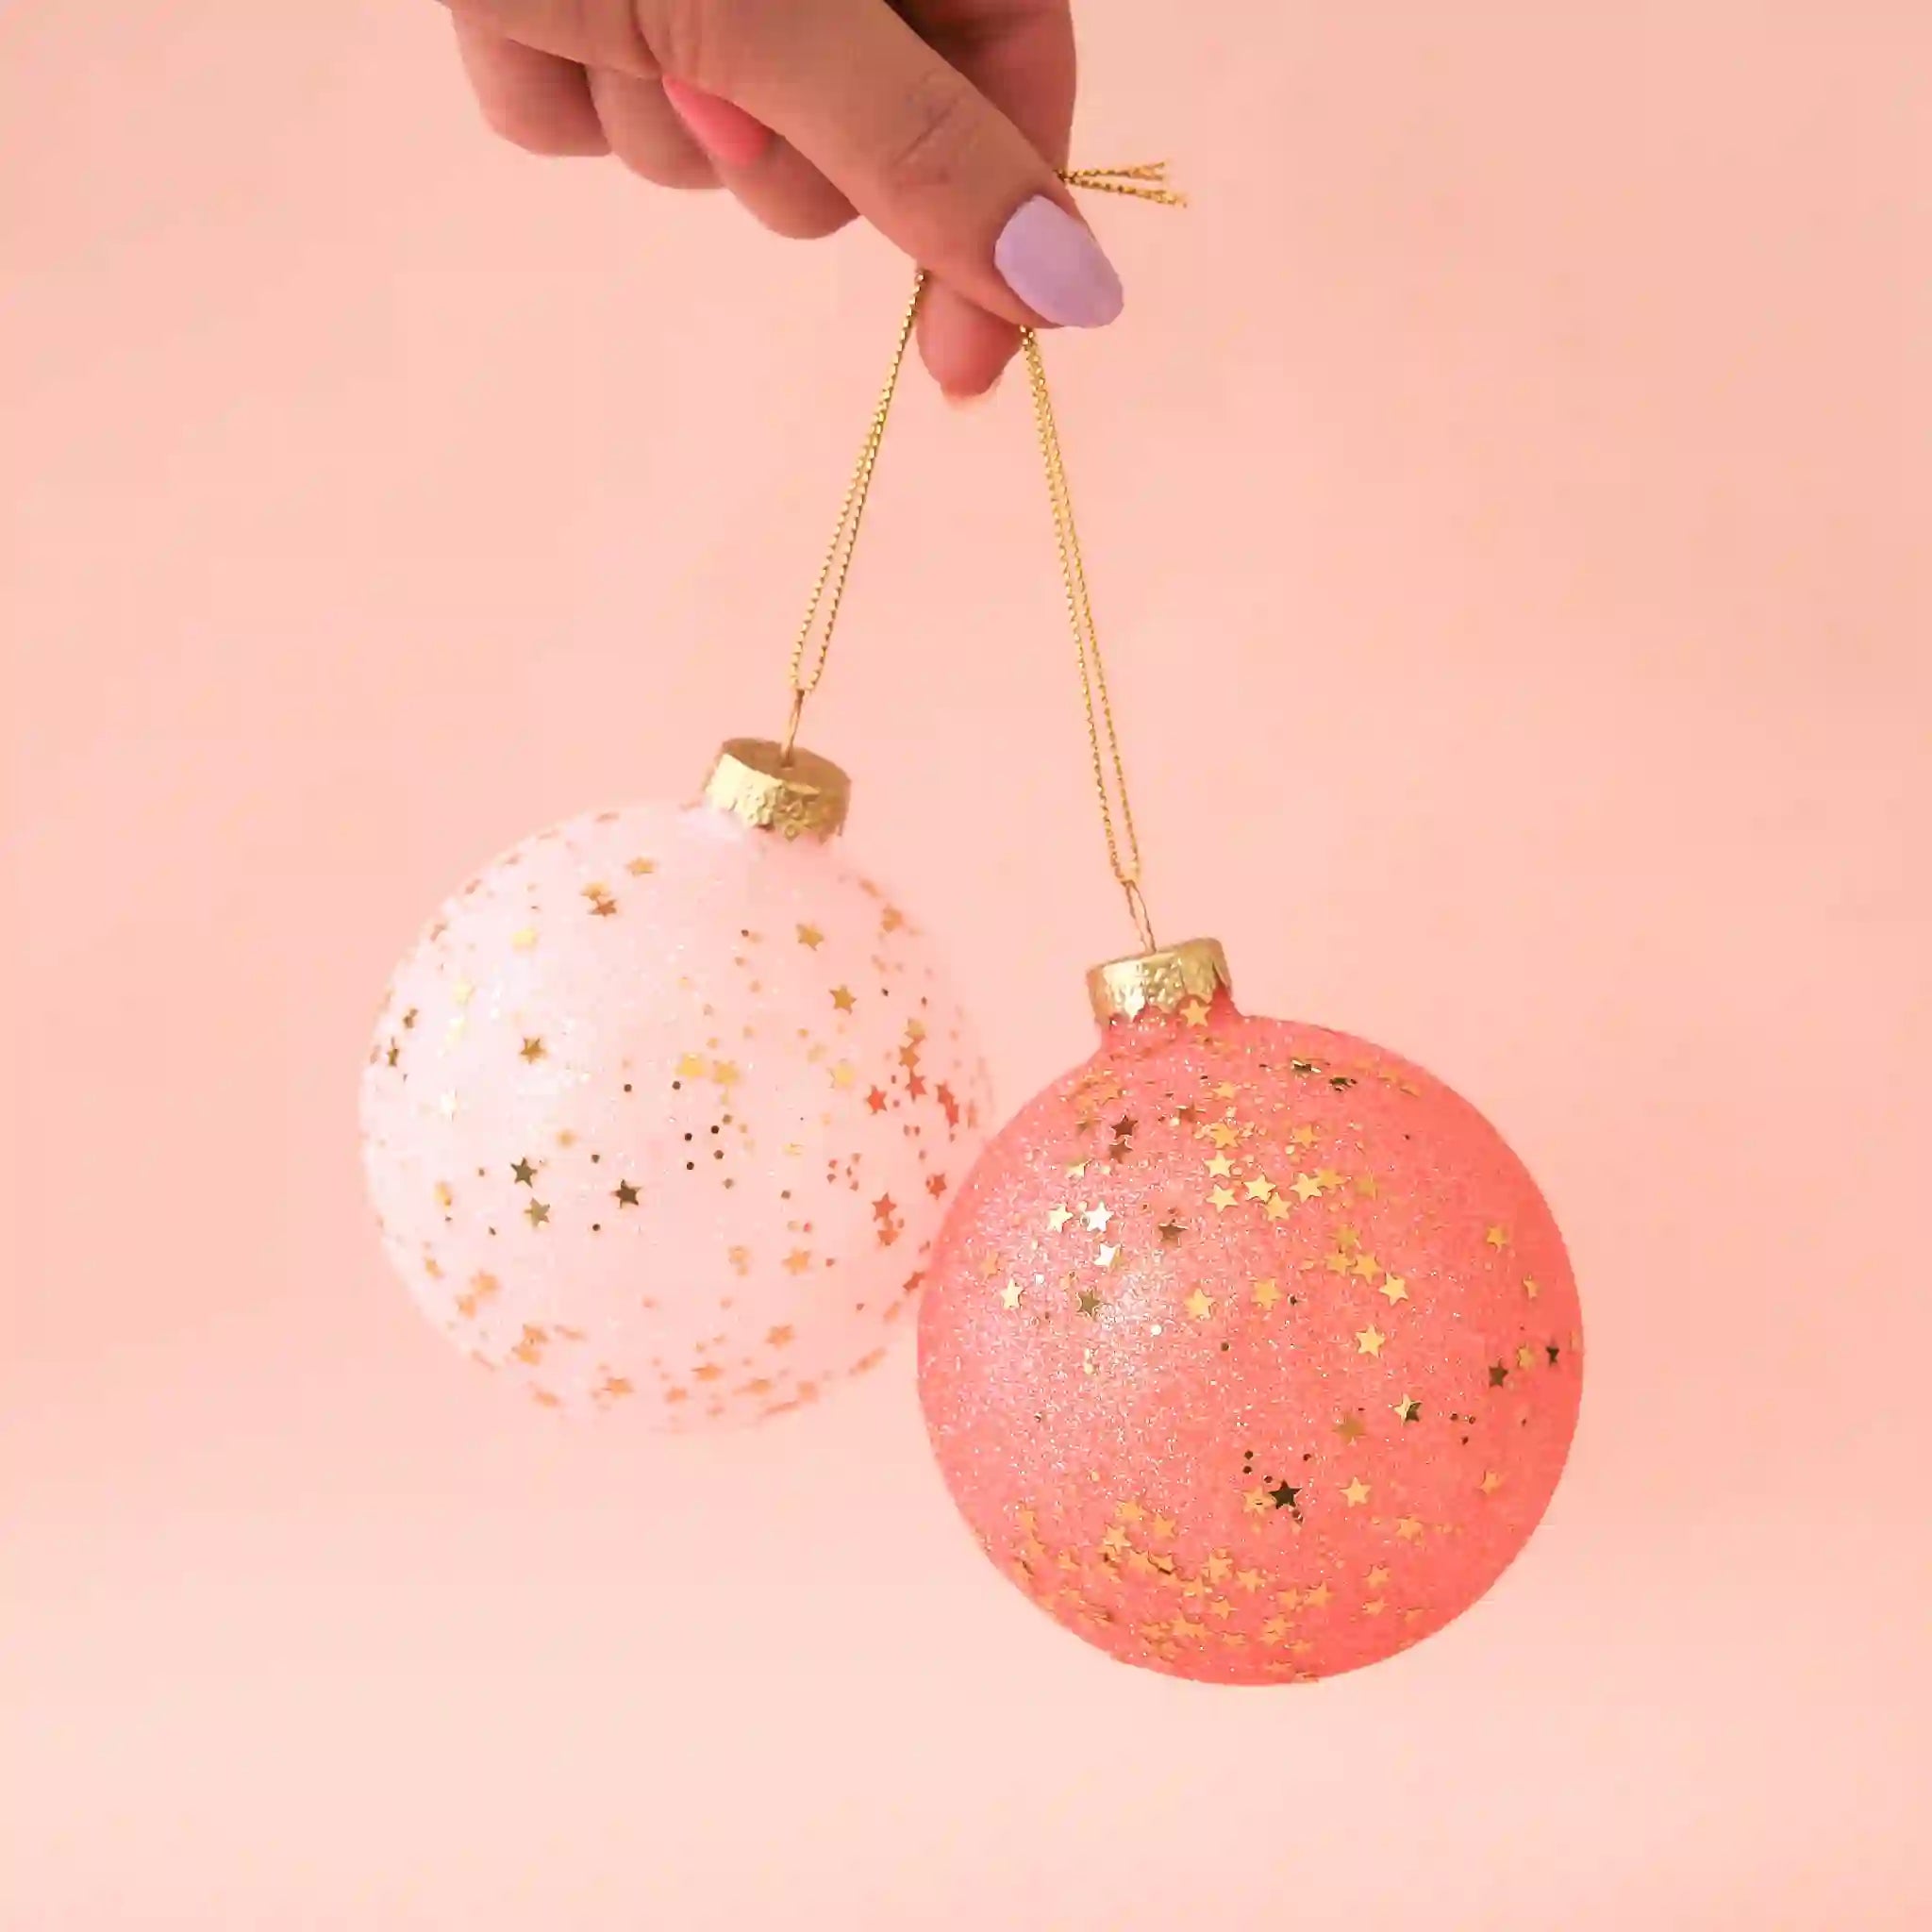 On a peachy background is two different tones of pink ball ornaments with gold glitter and stars. 